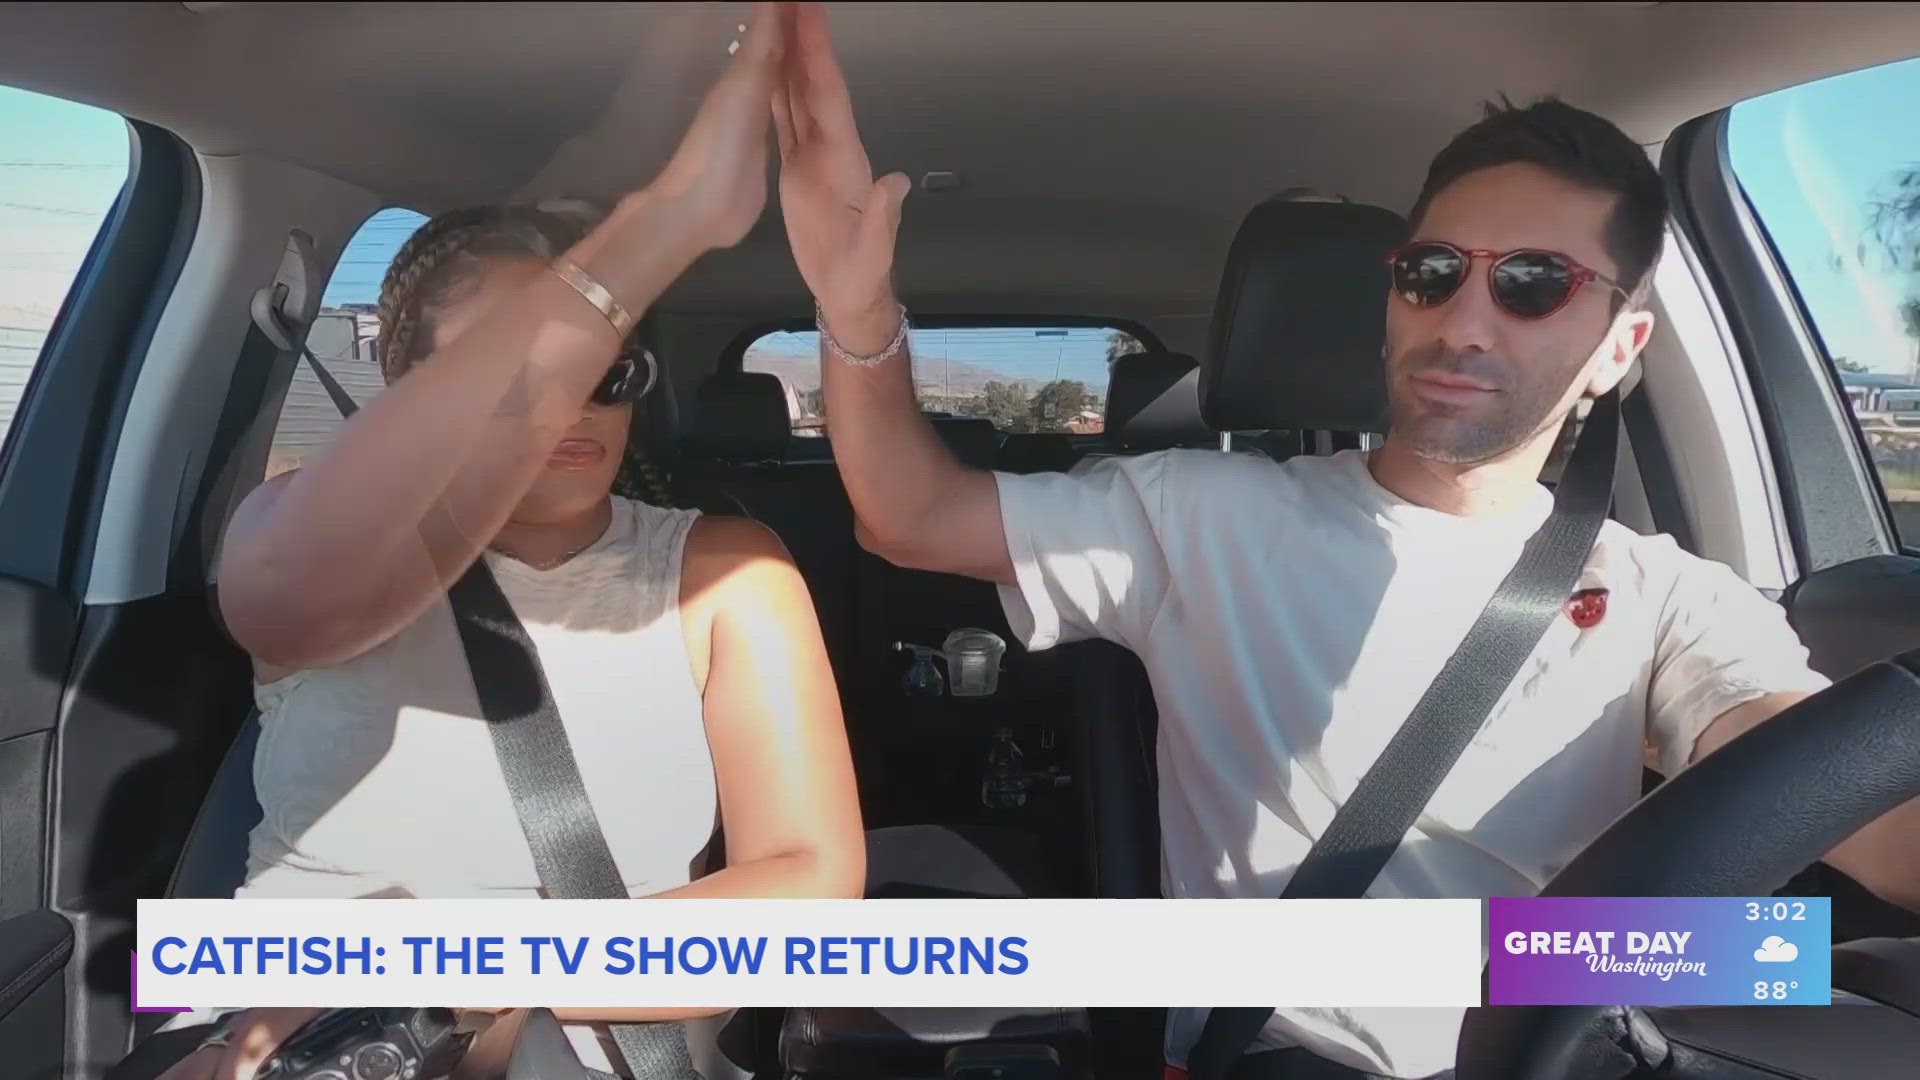 Ellen talks to Nev Schulman about "Catfish: The TV Show" returning for its’ 9th season on Tuesday, April 30th at 8PM on MTV.